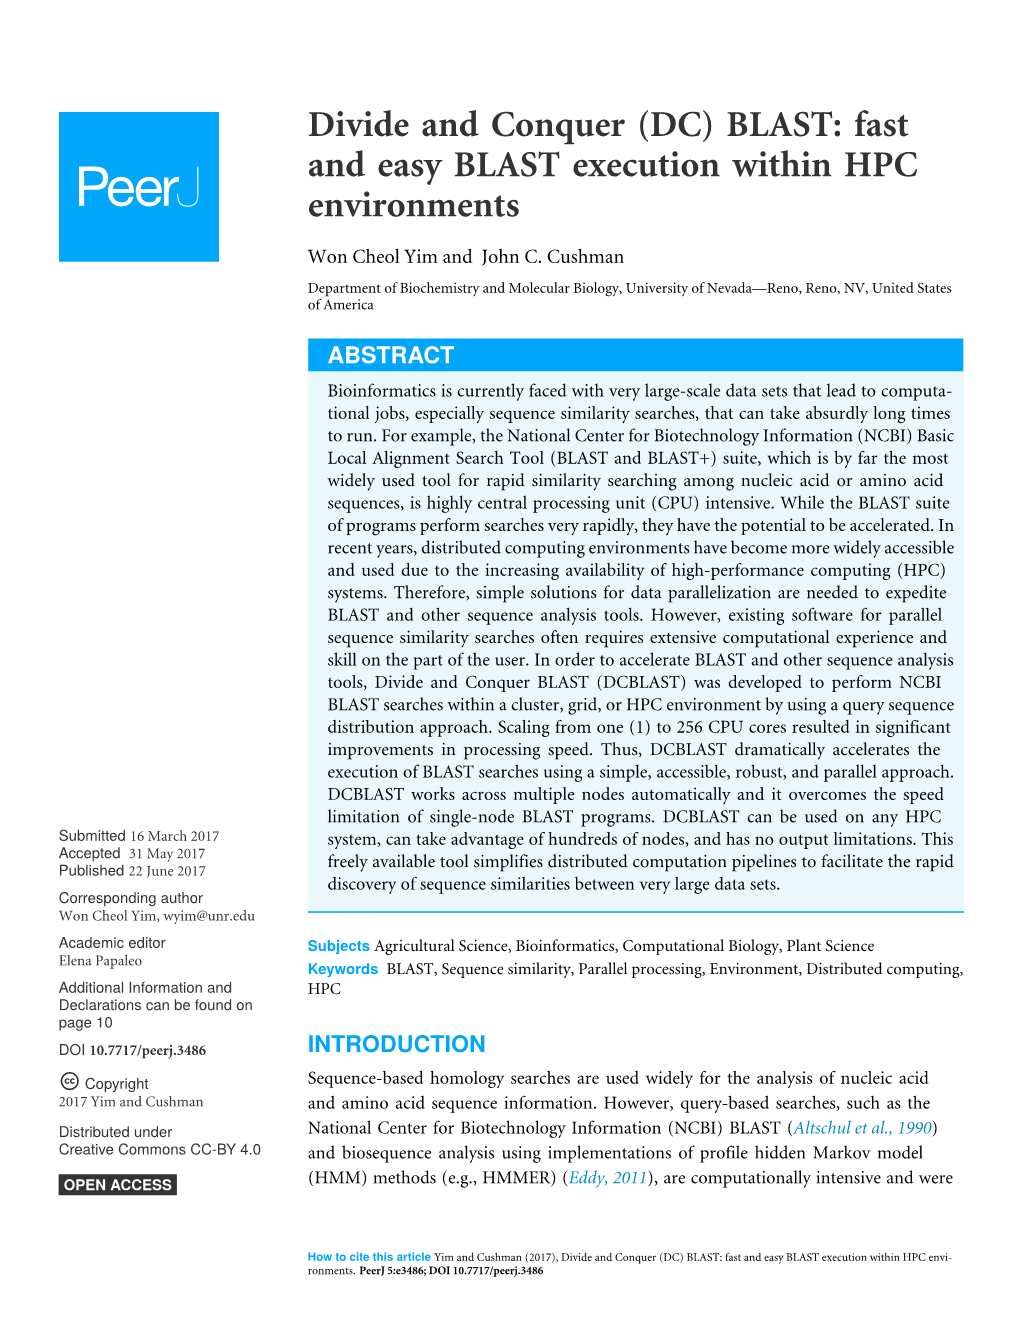 Fast and Easy BLAST Execution Within HPC Environments